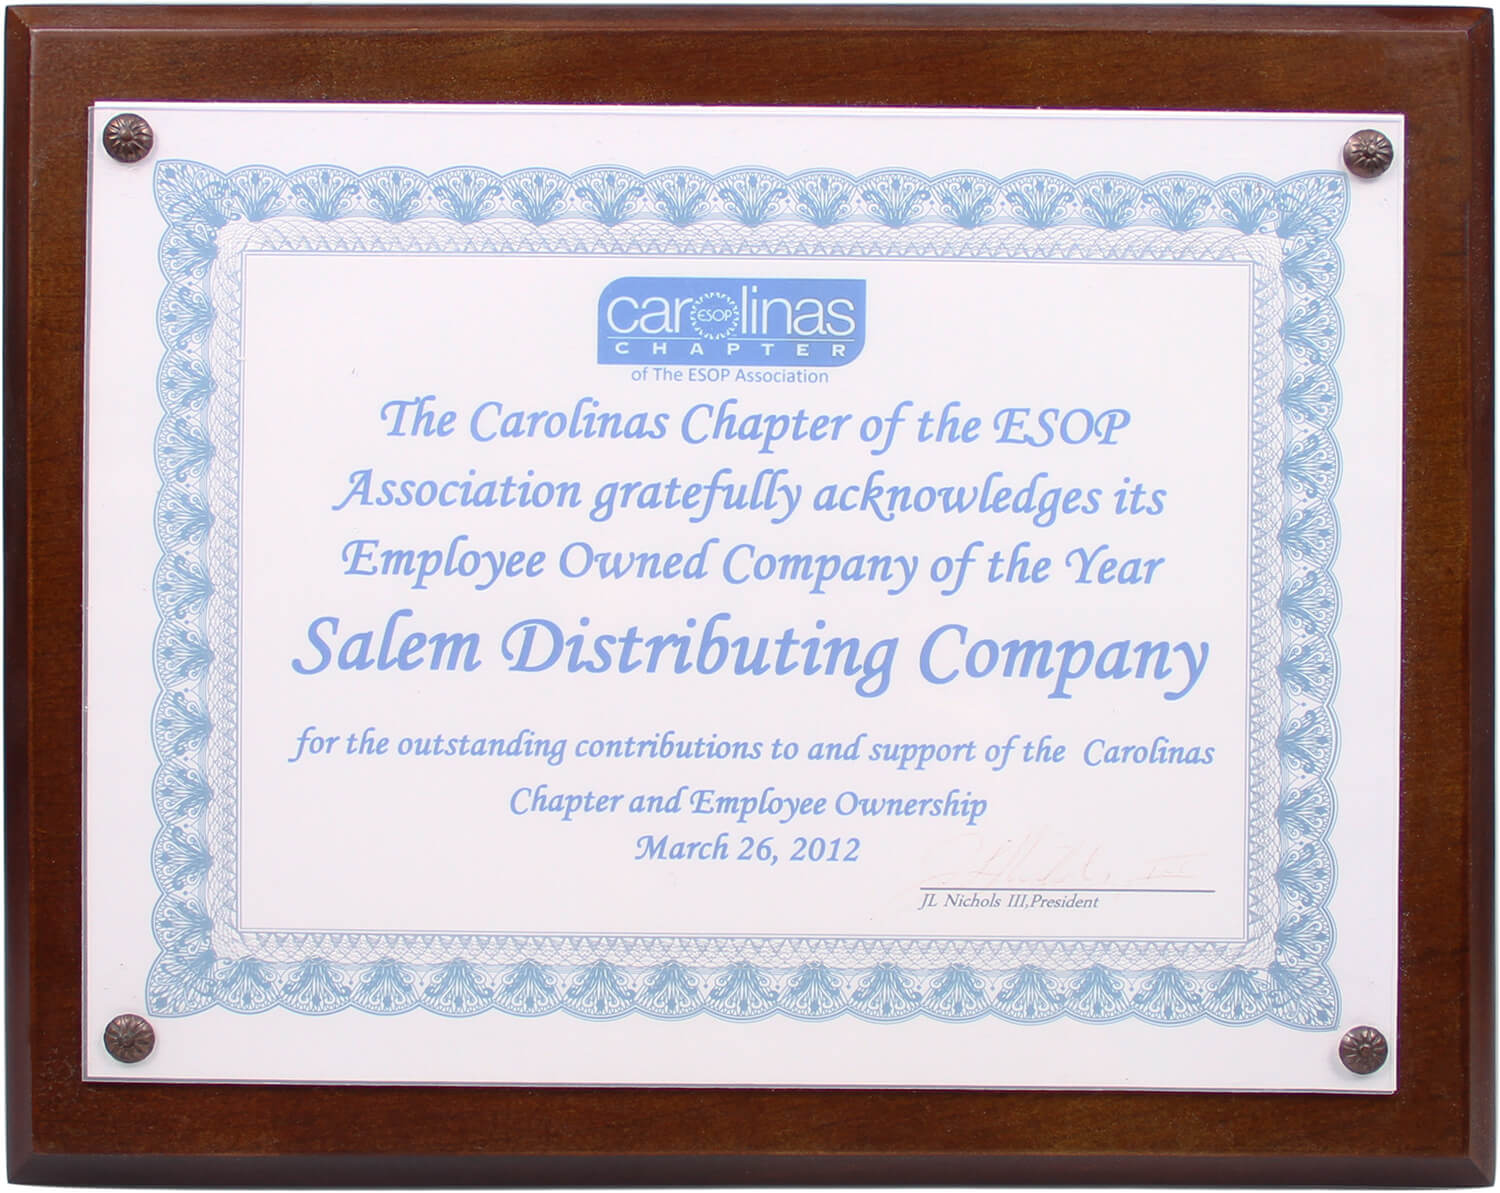 ESOP Company of the Year 2012